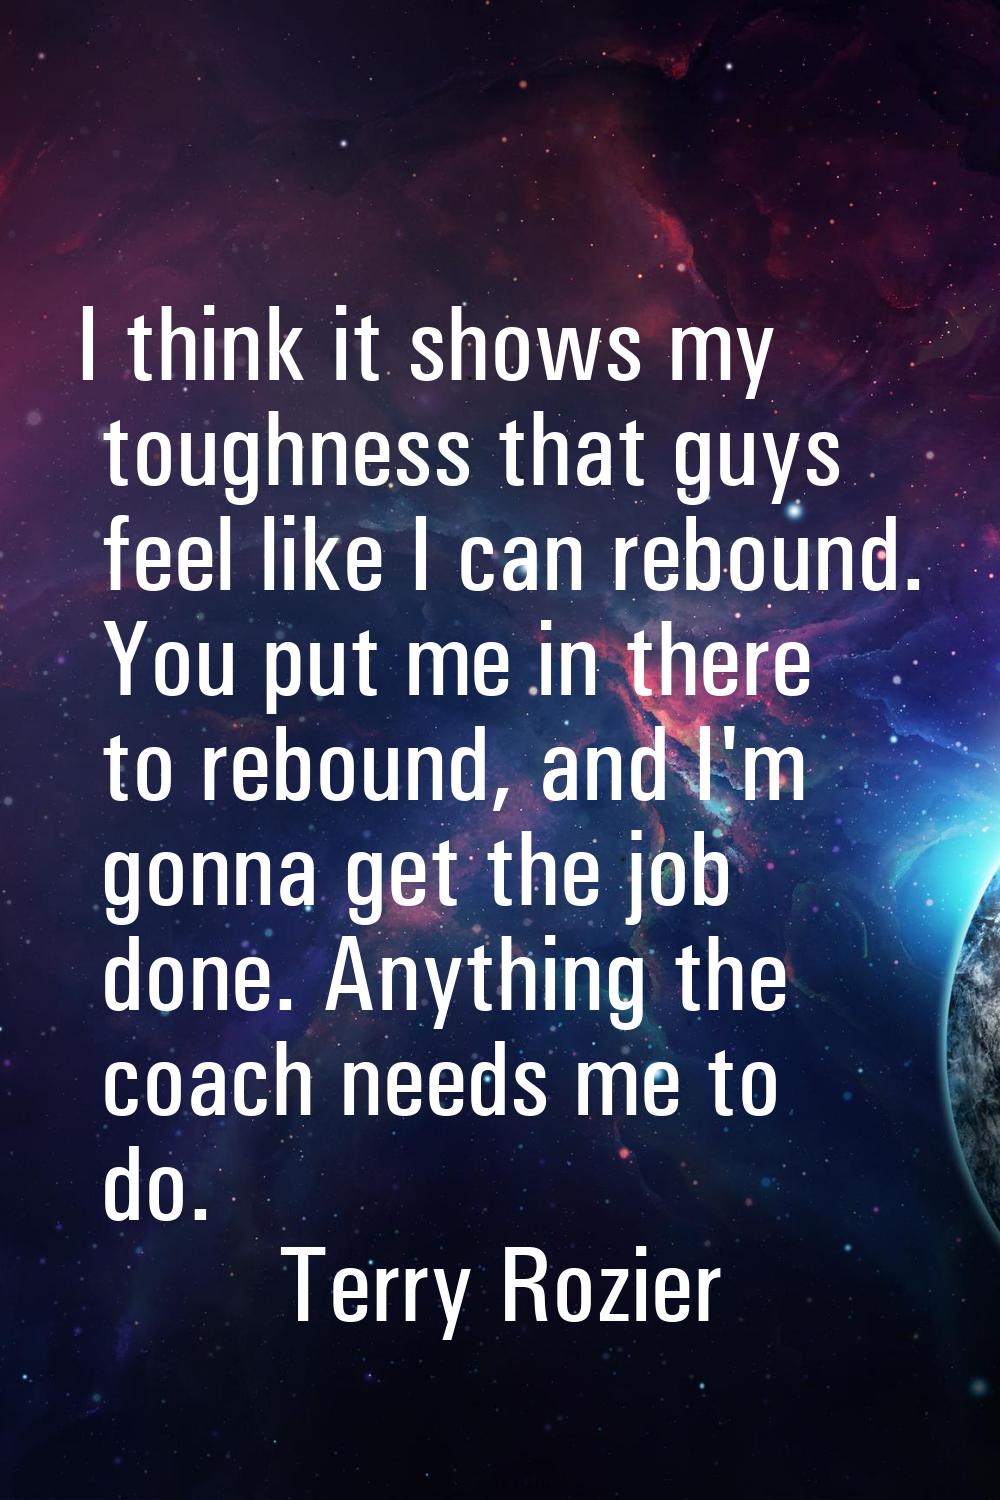 I think it shows my toughness that guys feel like I can rebound. You put me in there to rebound, an